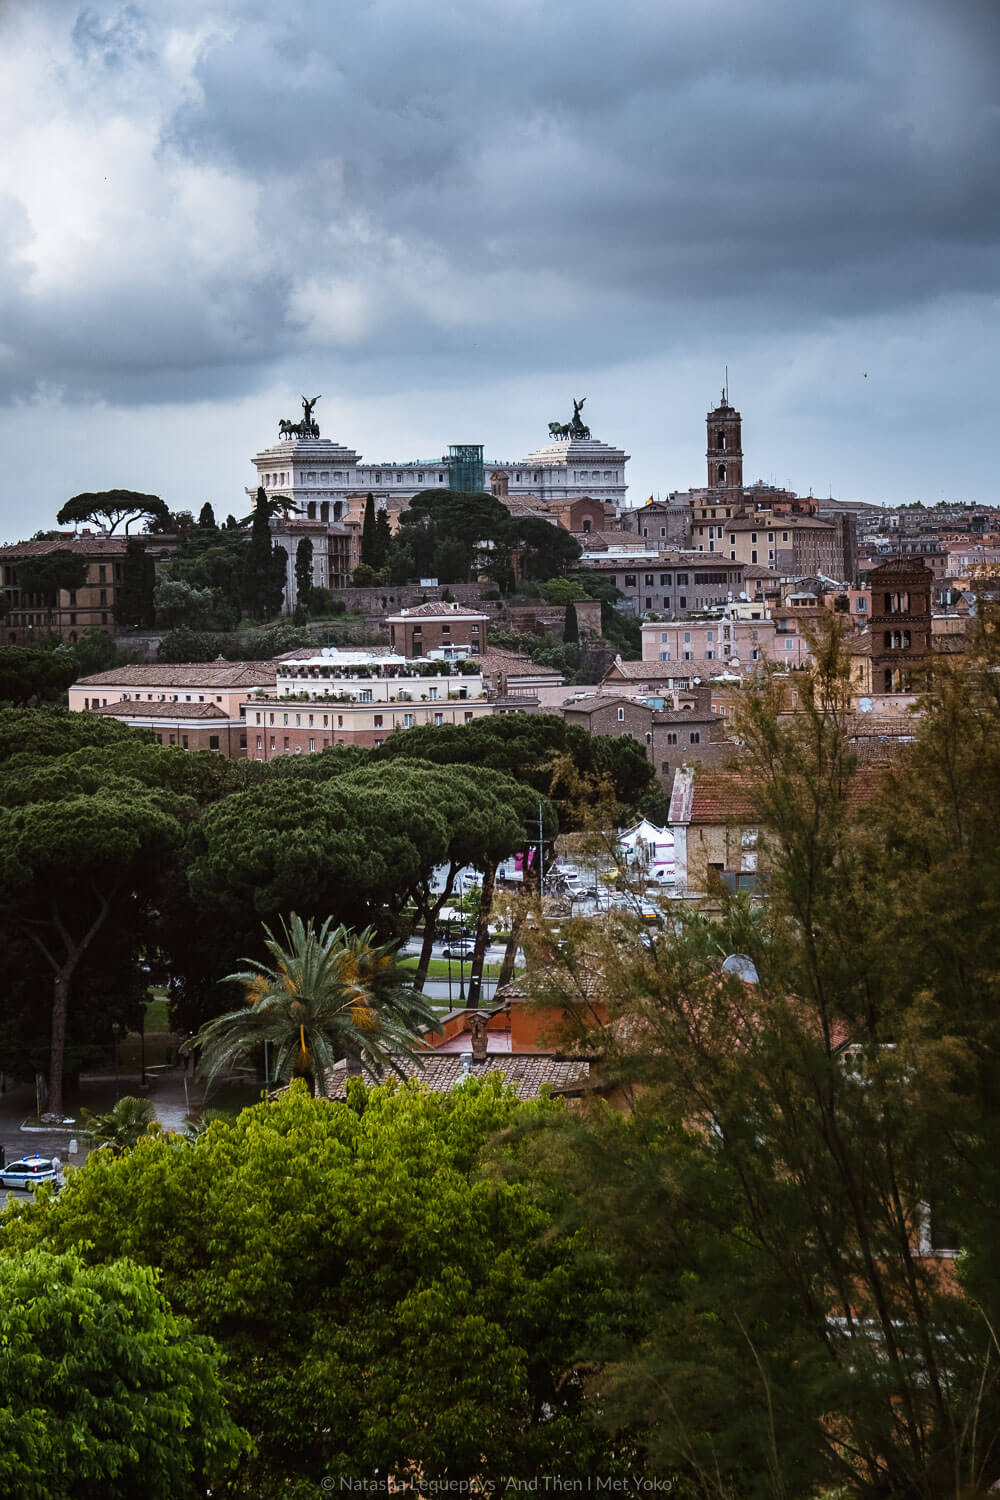 Views from the Orange Garden in Rome, Italy. Travel photography and guide by © Natasha Lequepeys for "And Then I Met Yoko". #rome #italy #travelblog #travelphotography